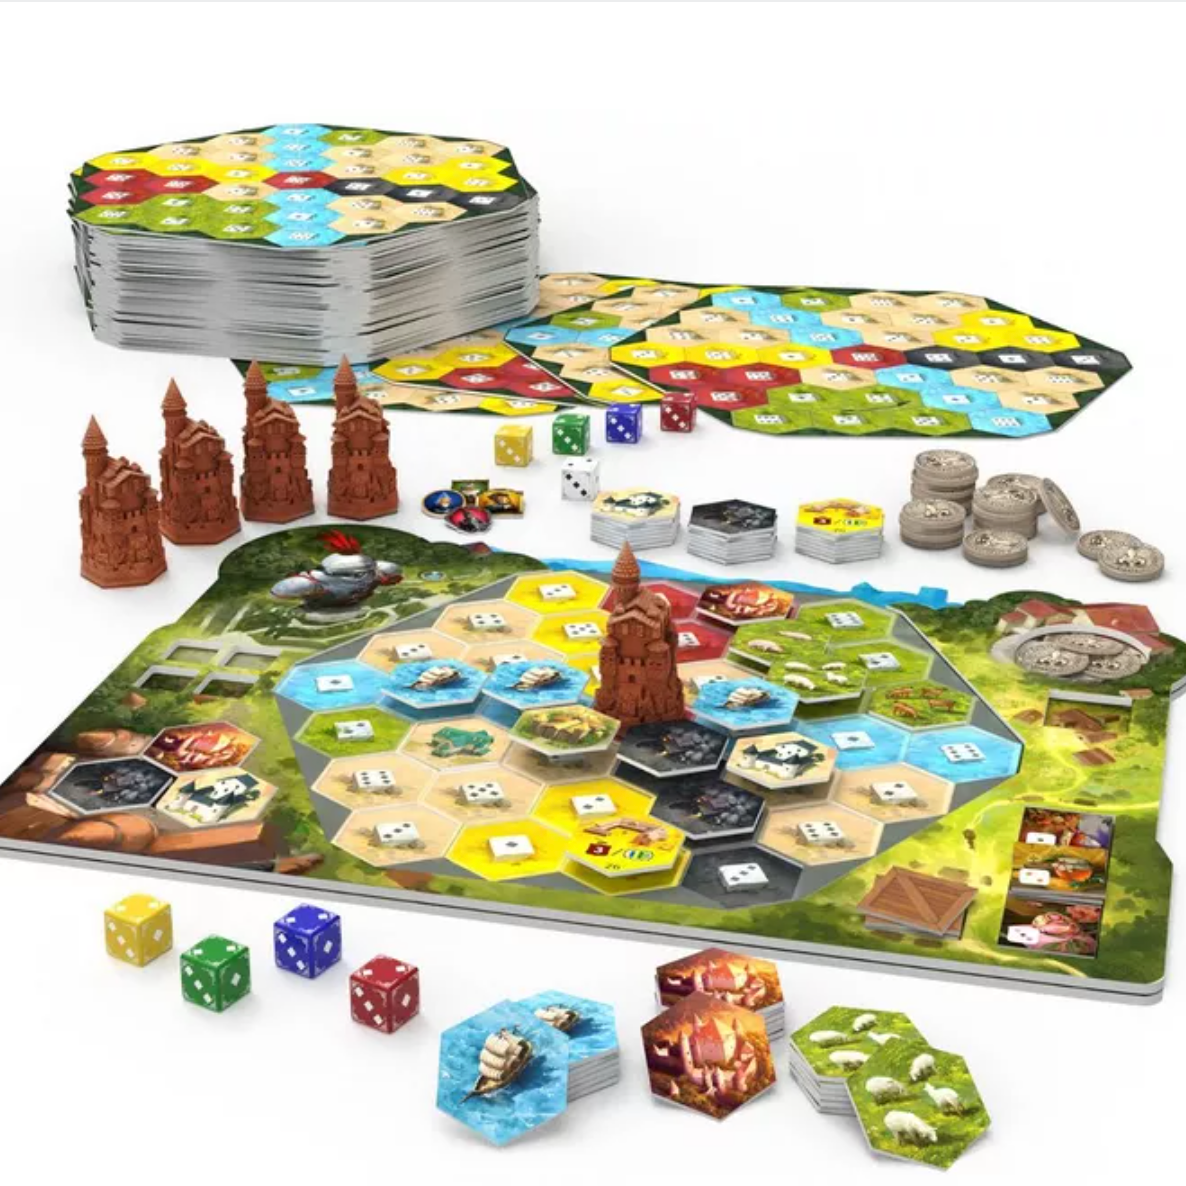 Castles of Burgundy Deluxe Game